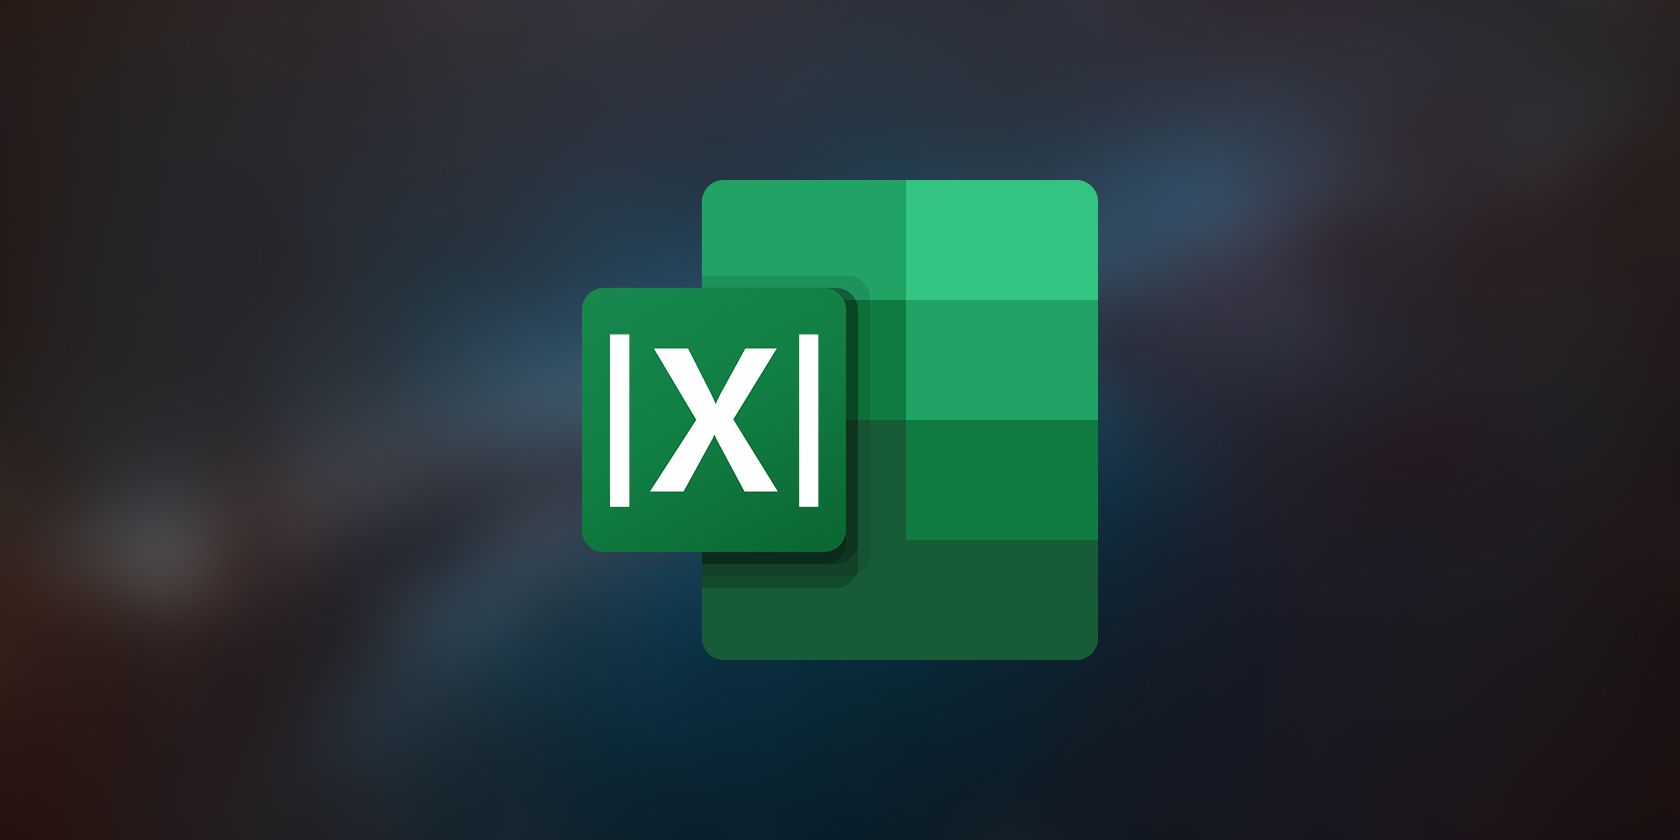 Excel logo in absolute value bars